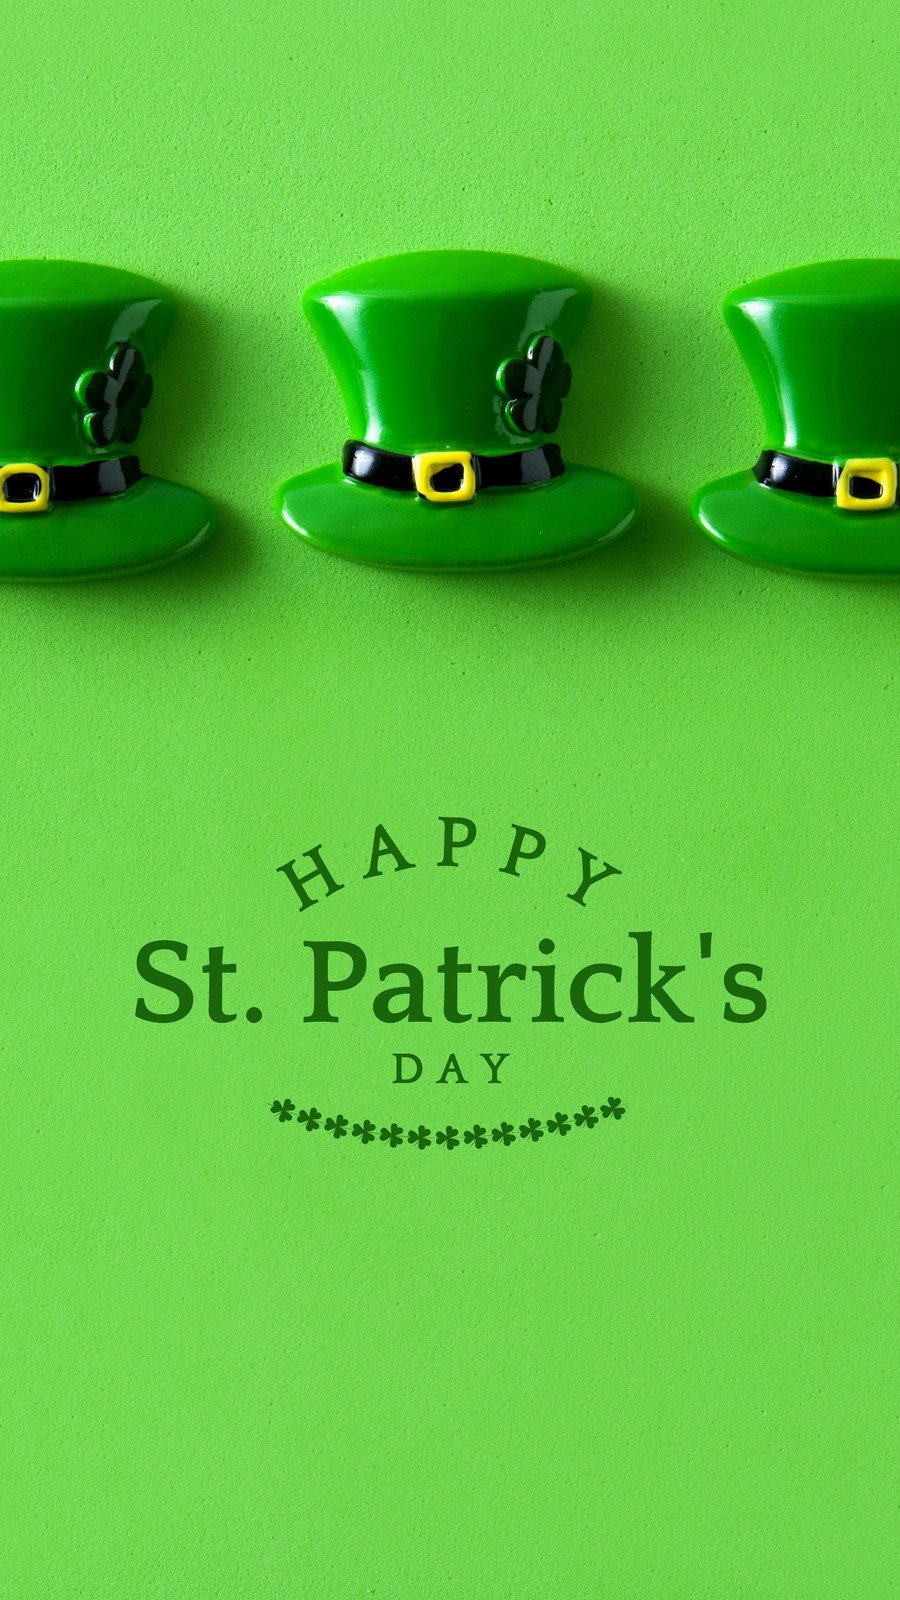 St Patricks Day Wallpaper  Iphone by TheMexicanMaster96 on DeviantArt